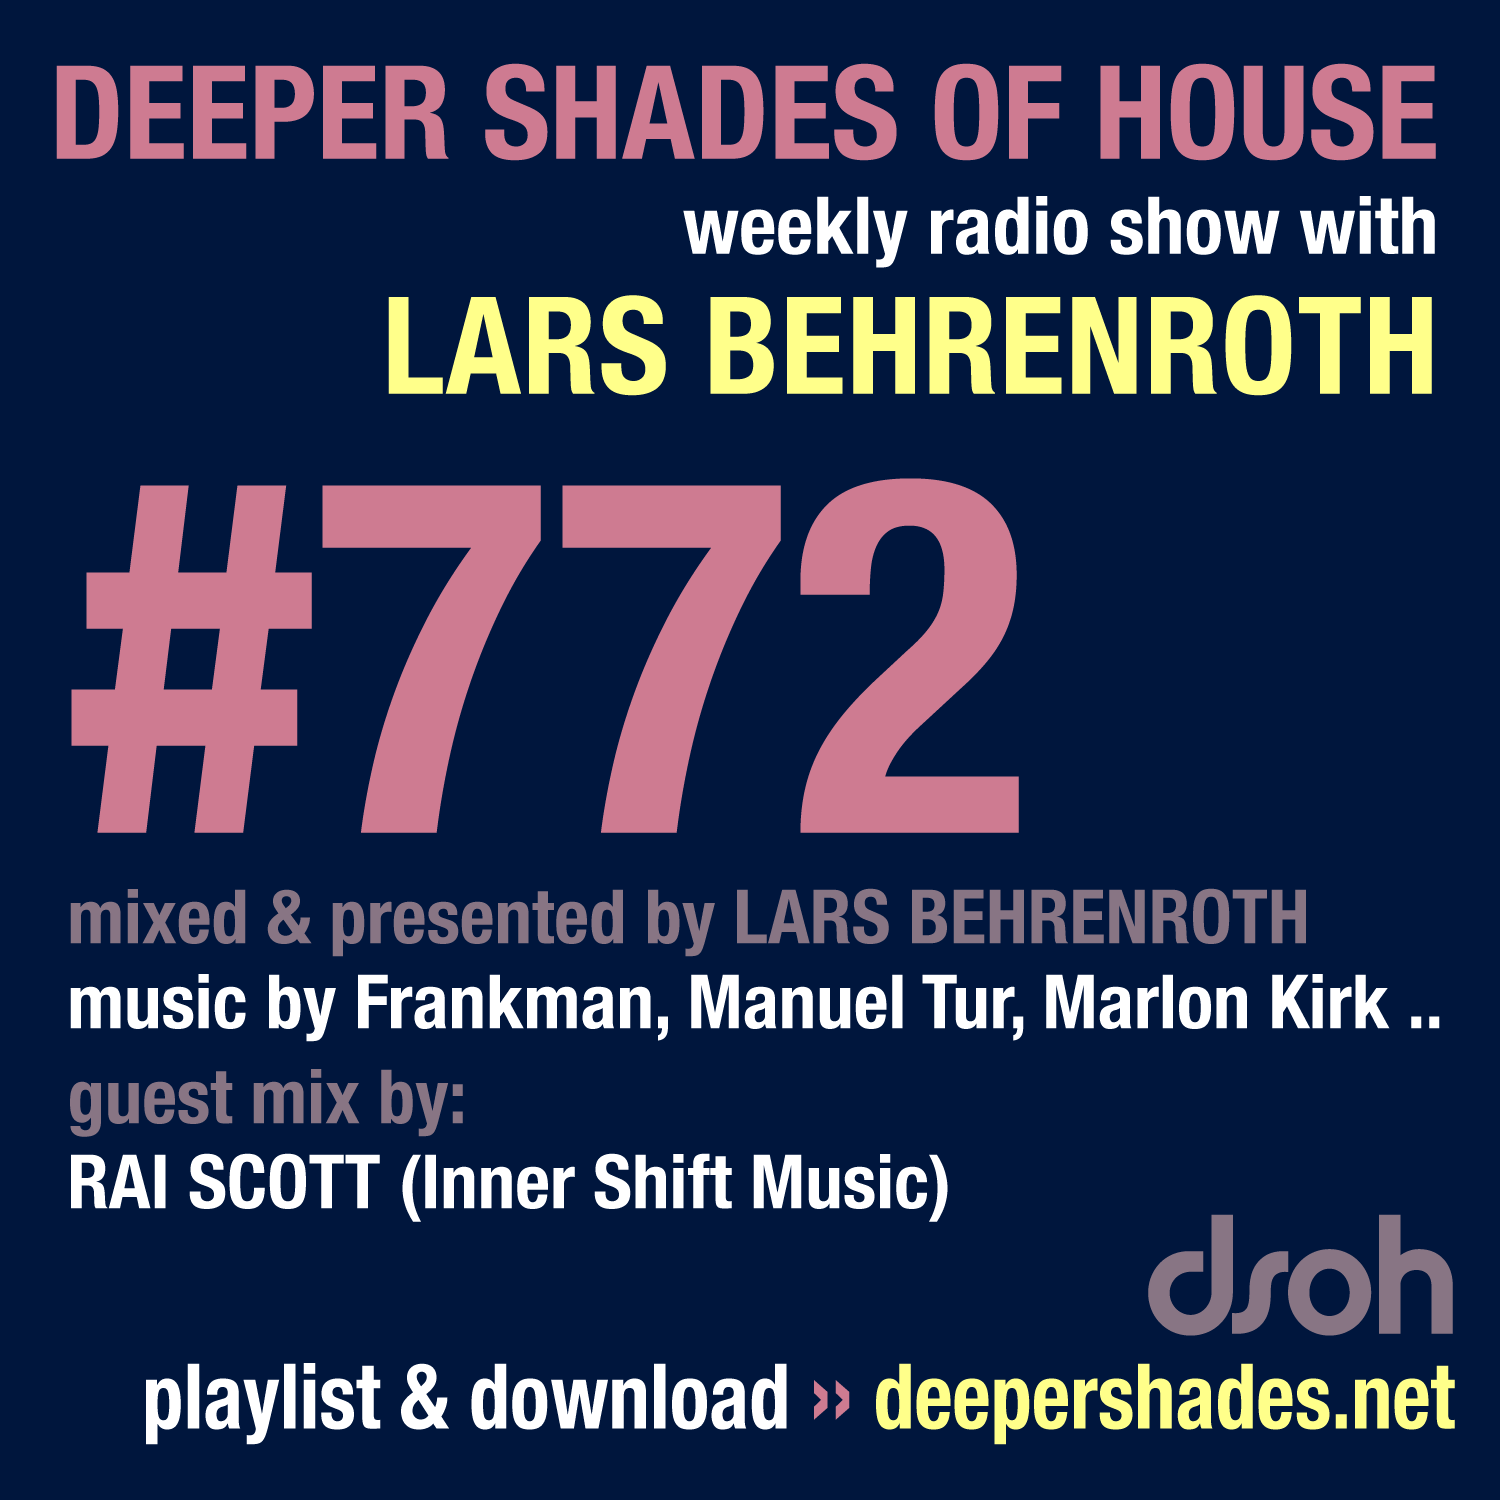 Deeper Shades Of House 772